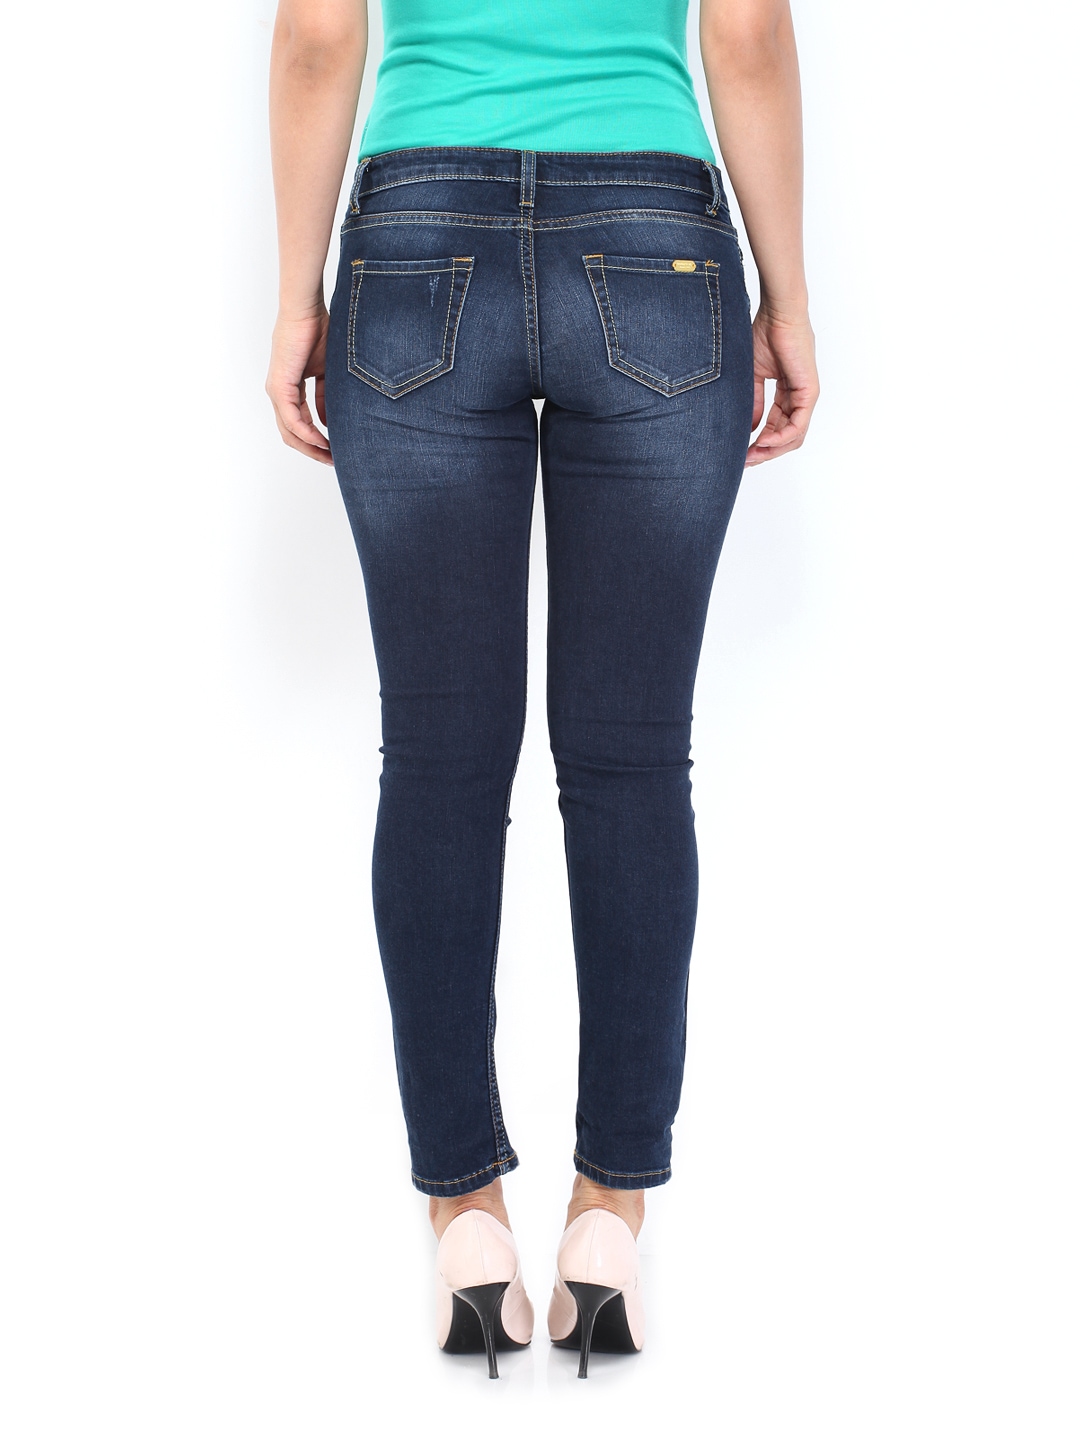 Home Clothing Women Clothing Jeans United Colors of Benetton Jeans